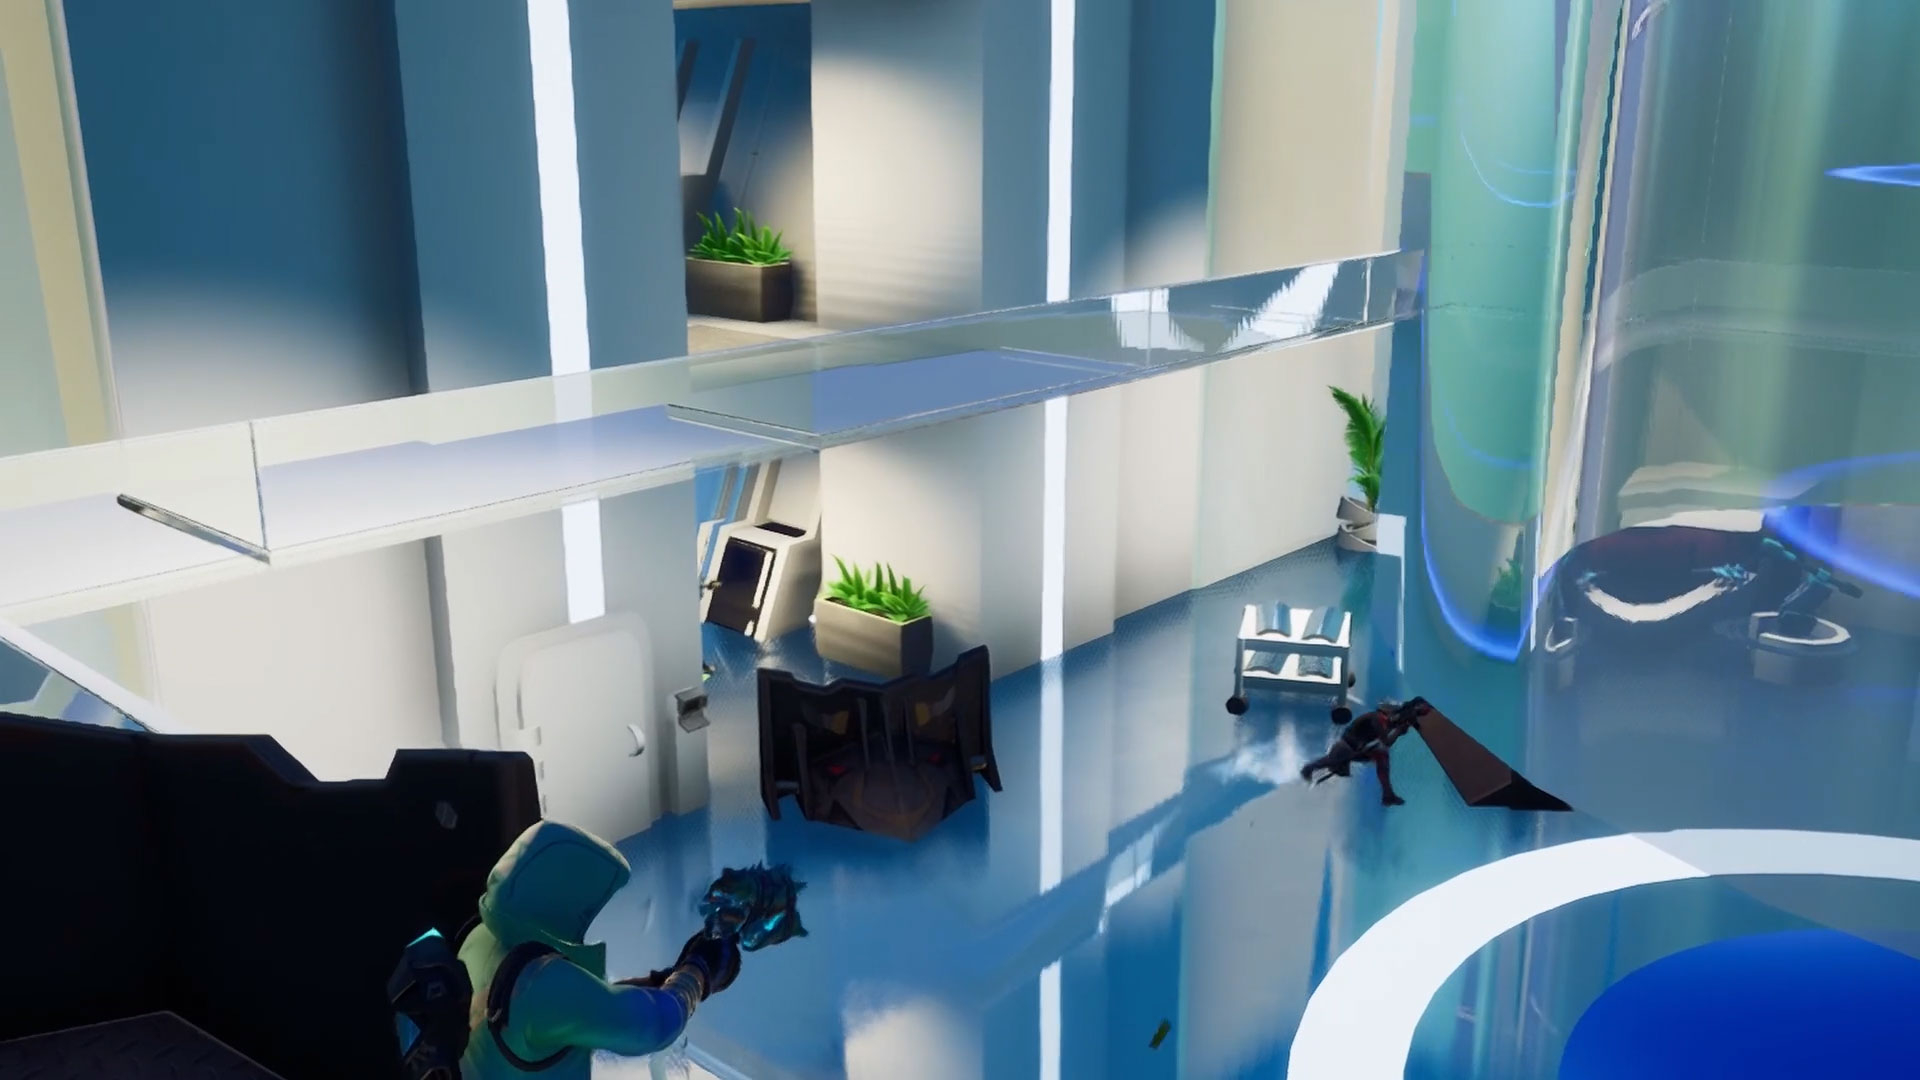 Gillette is building out two new playable versions of the “Gillette Face-off” map – a futuristic lab and a mineshaft – each featuring action-packed, no-build gameplay and boasting various Gillette product.